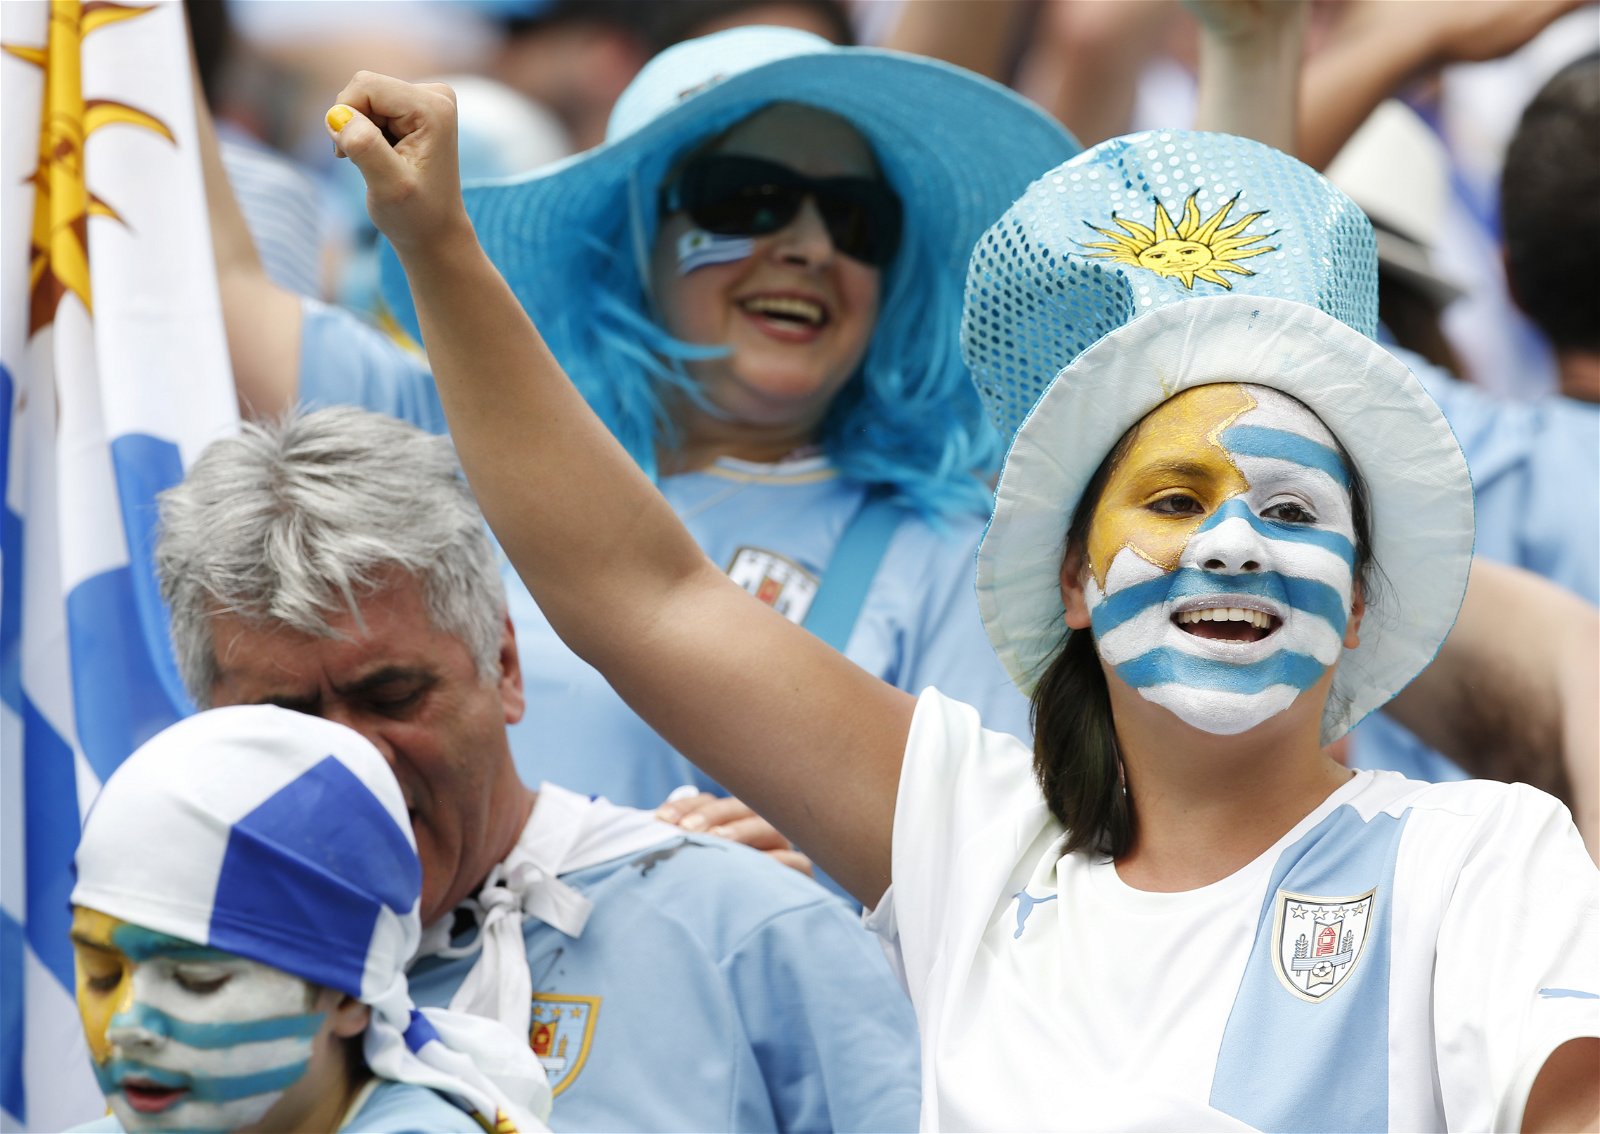 How to watch France vs Argentina live stream